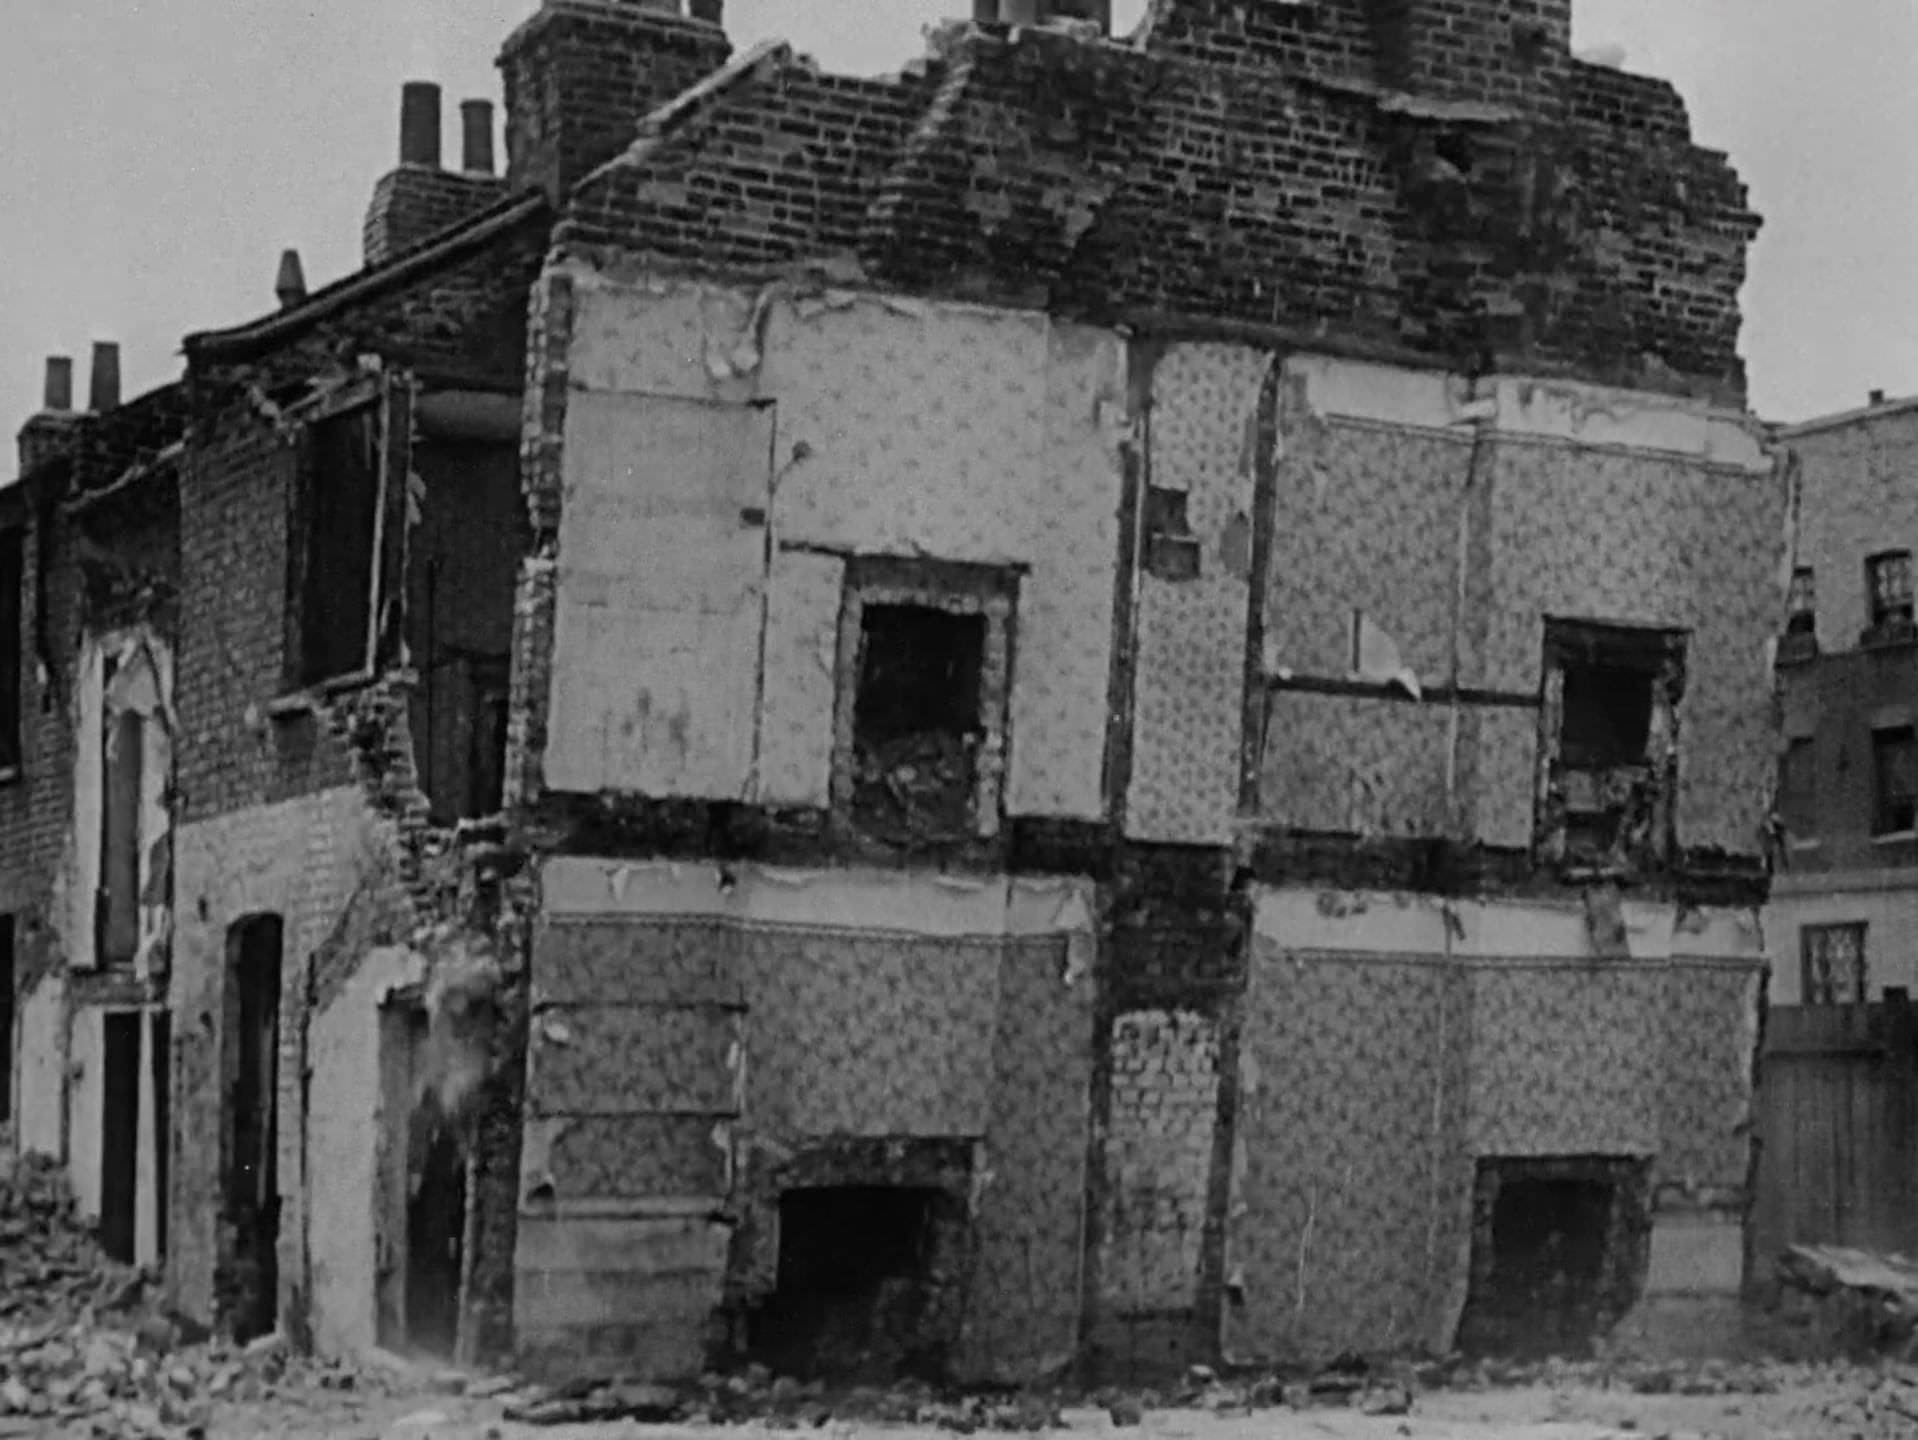 Demolition of a block of houses in what would become the Regent Park housing project, 1953